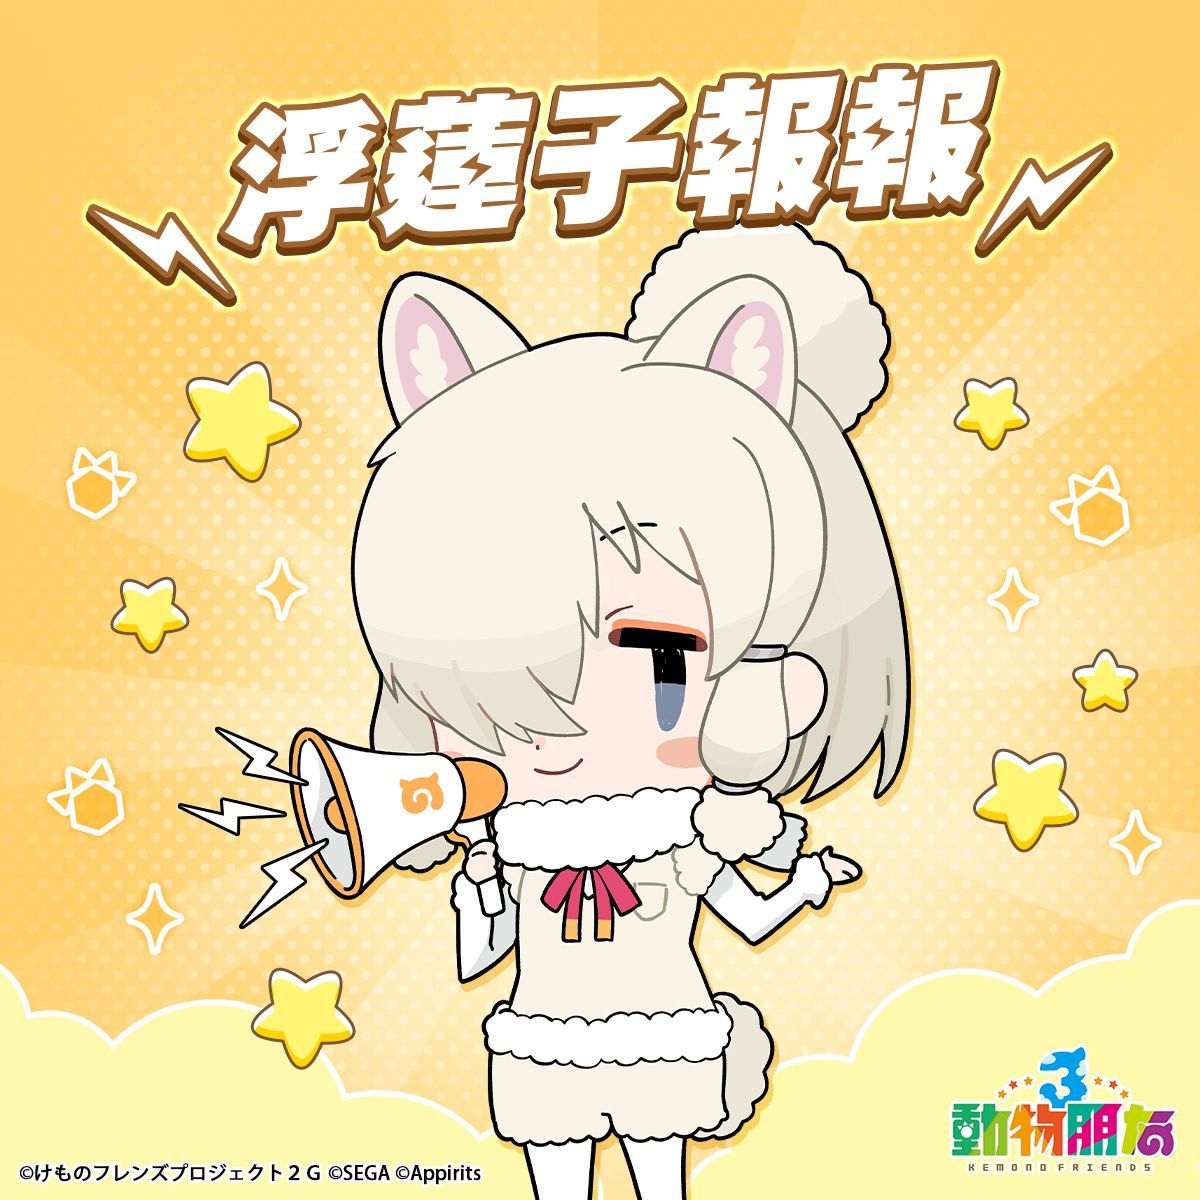 Official Alpaca Suri Chibi art posted by KF3 Taiwan Twitter account